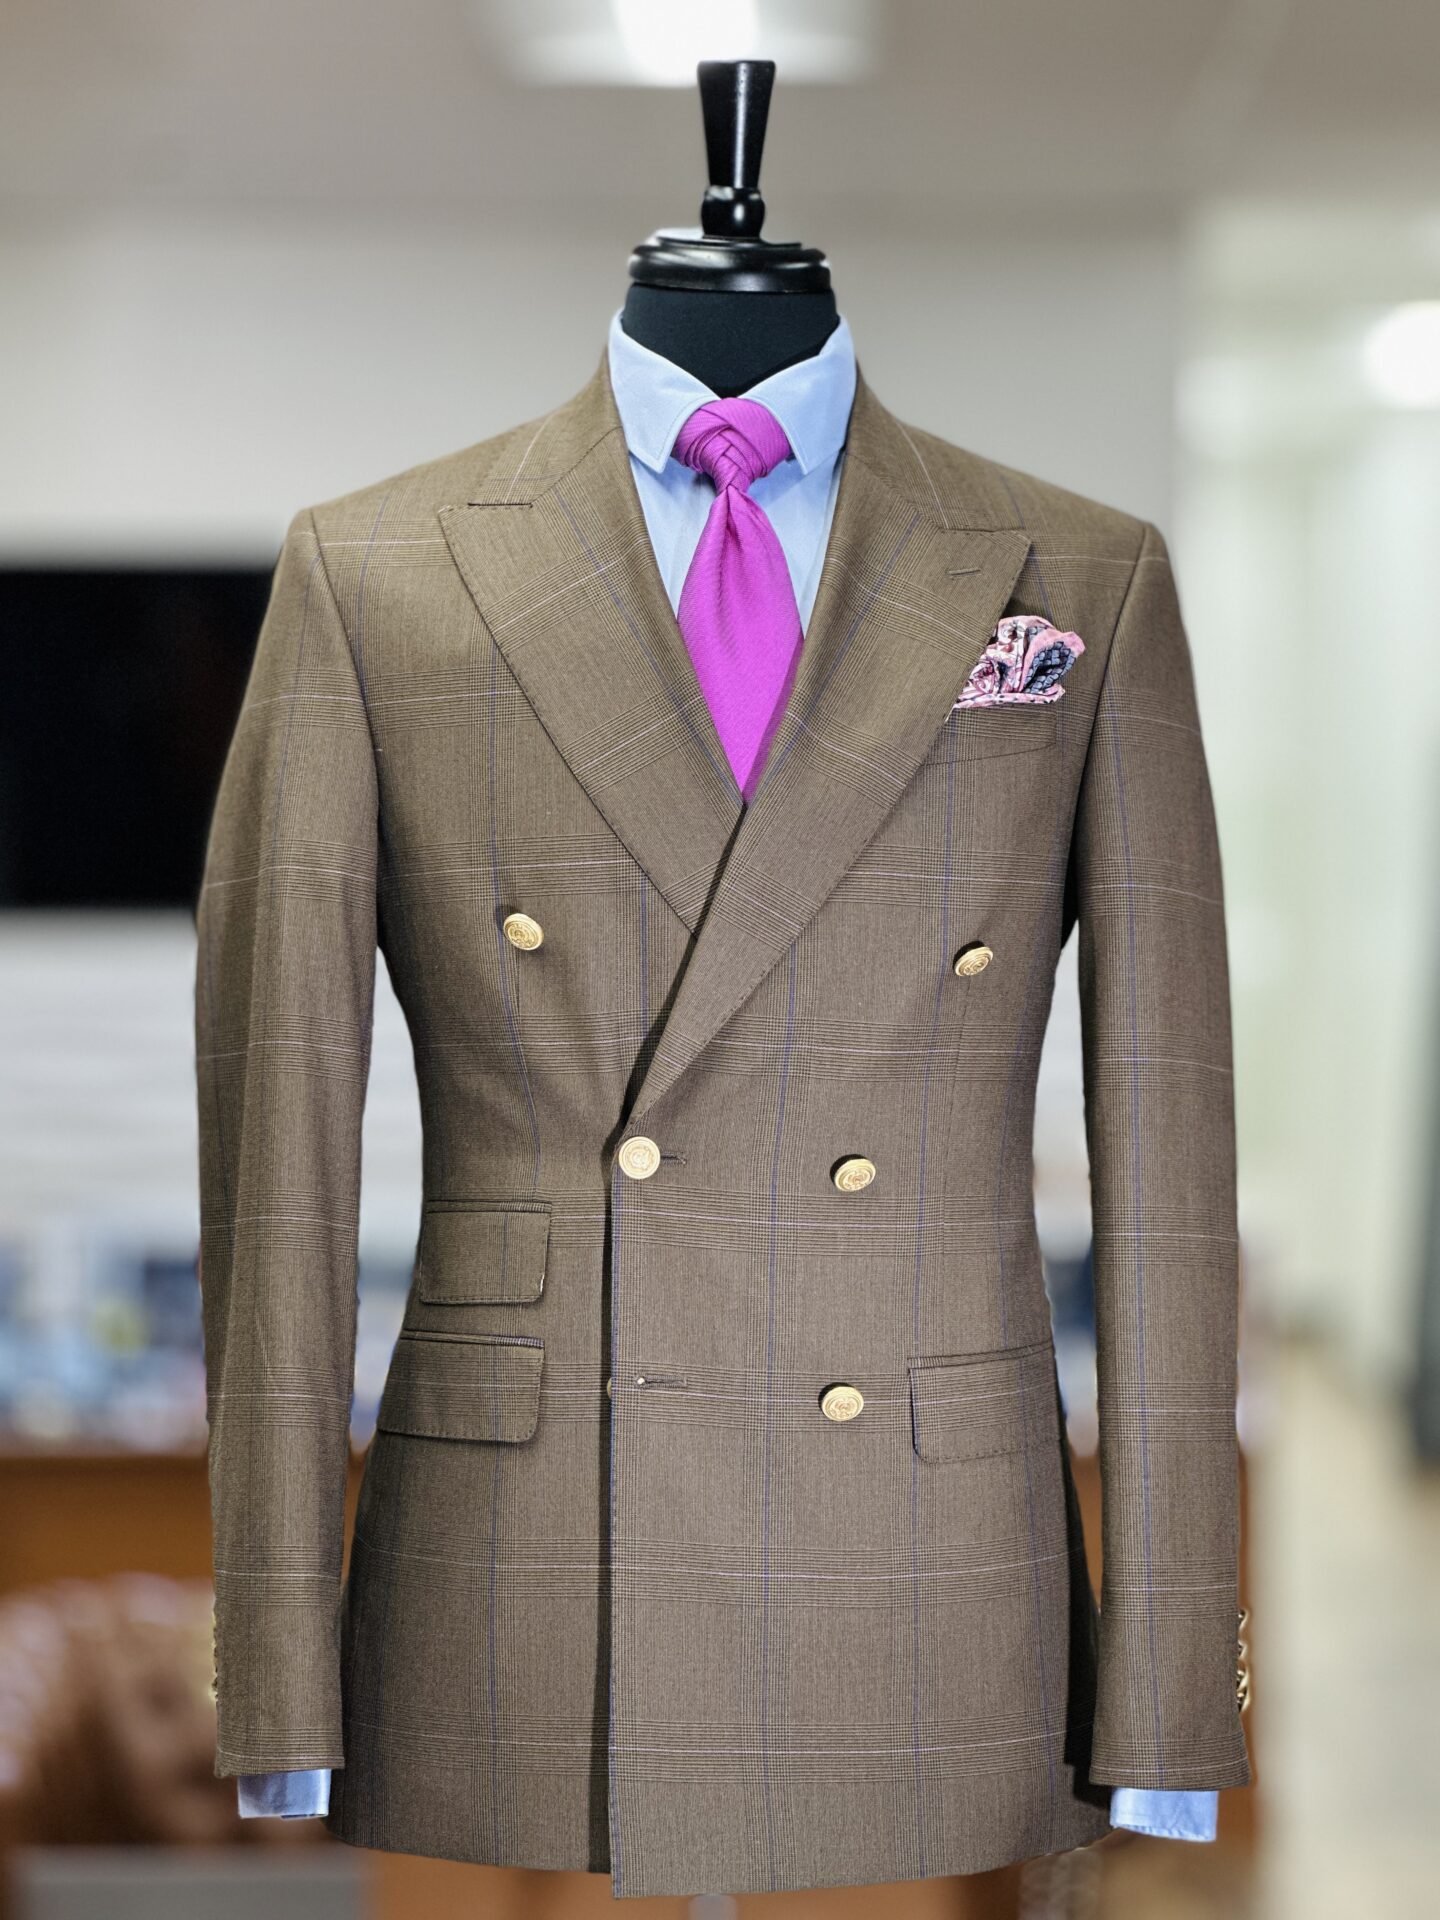 Men's luxurious clothing, Ready to wear